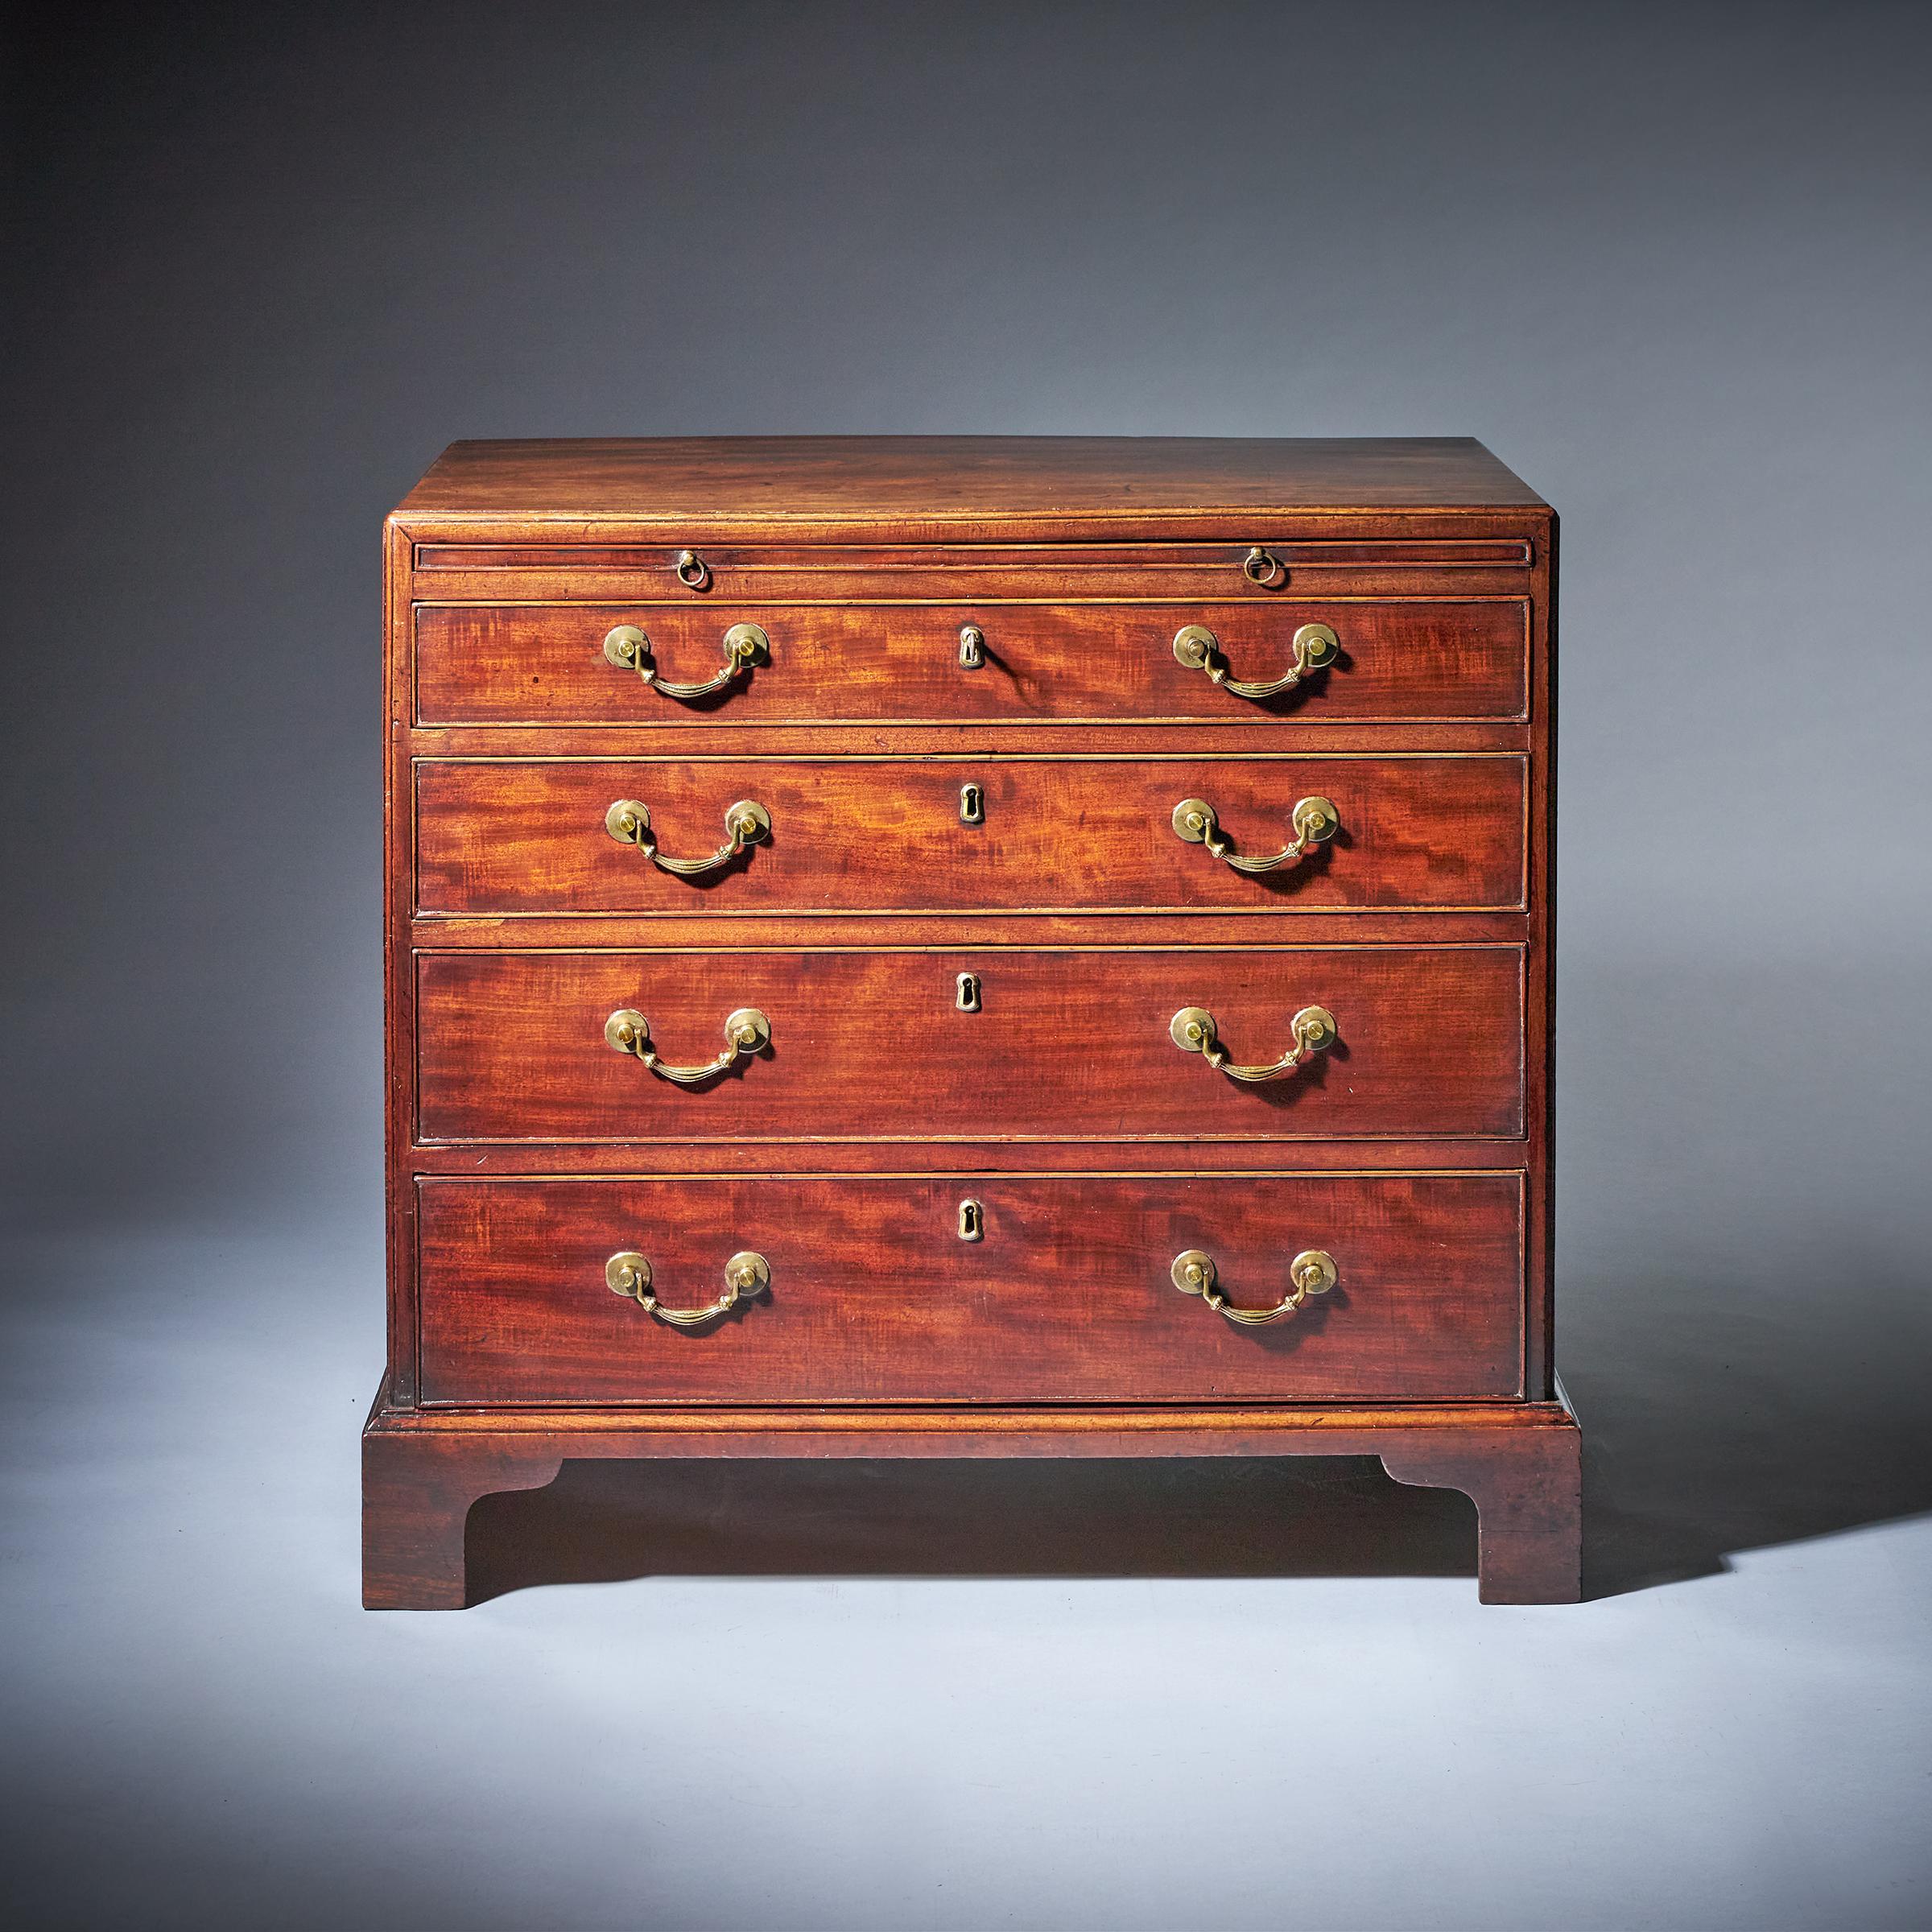 A fine and original 18th-century George II figured mahogany caddy-topped Bachelors chest with brushing slide, Circa 1740. 

Attributed to Giles Grendey

The chest is 'caddy' moulded to the styles and top above a brushing slide over four long